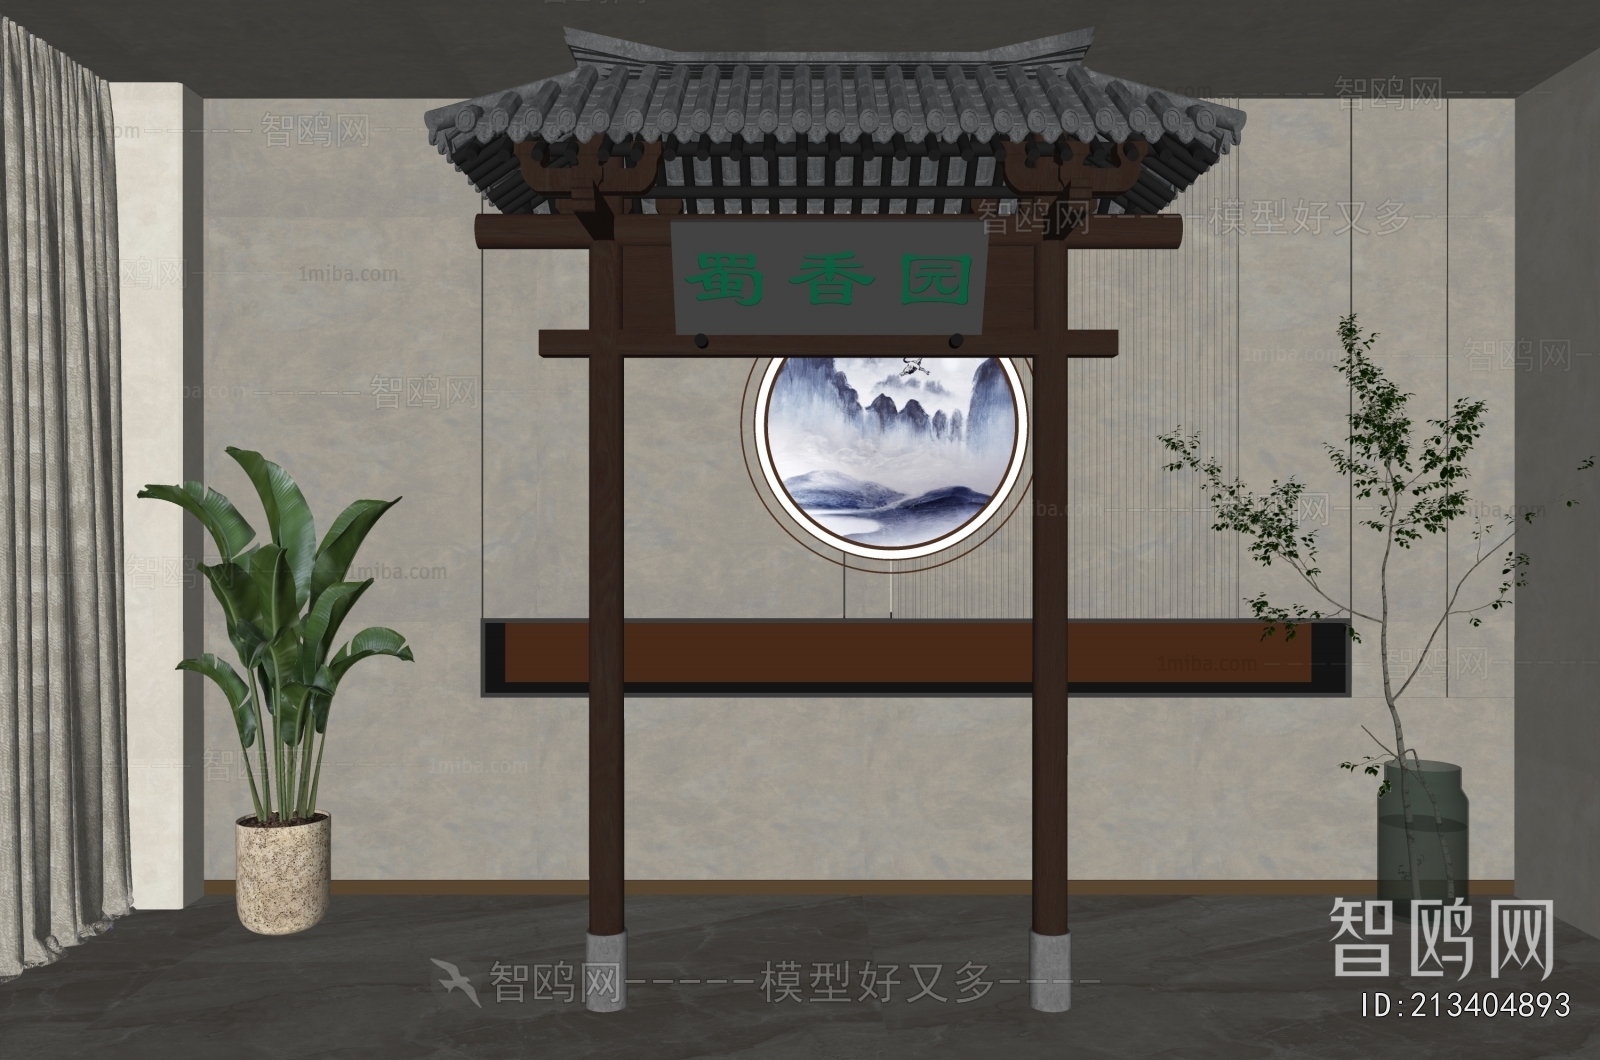 New Chinese Style Decorated Archway